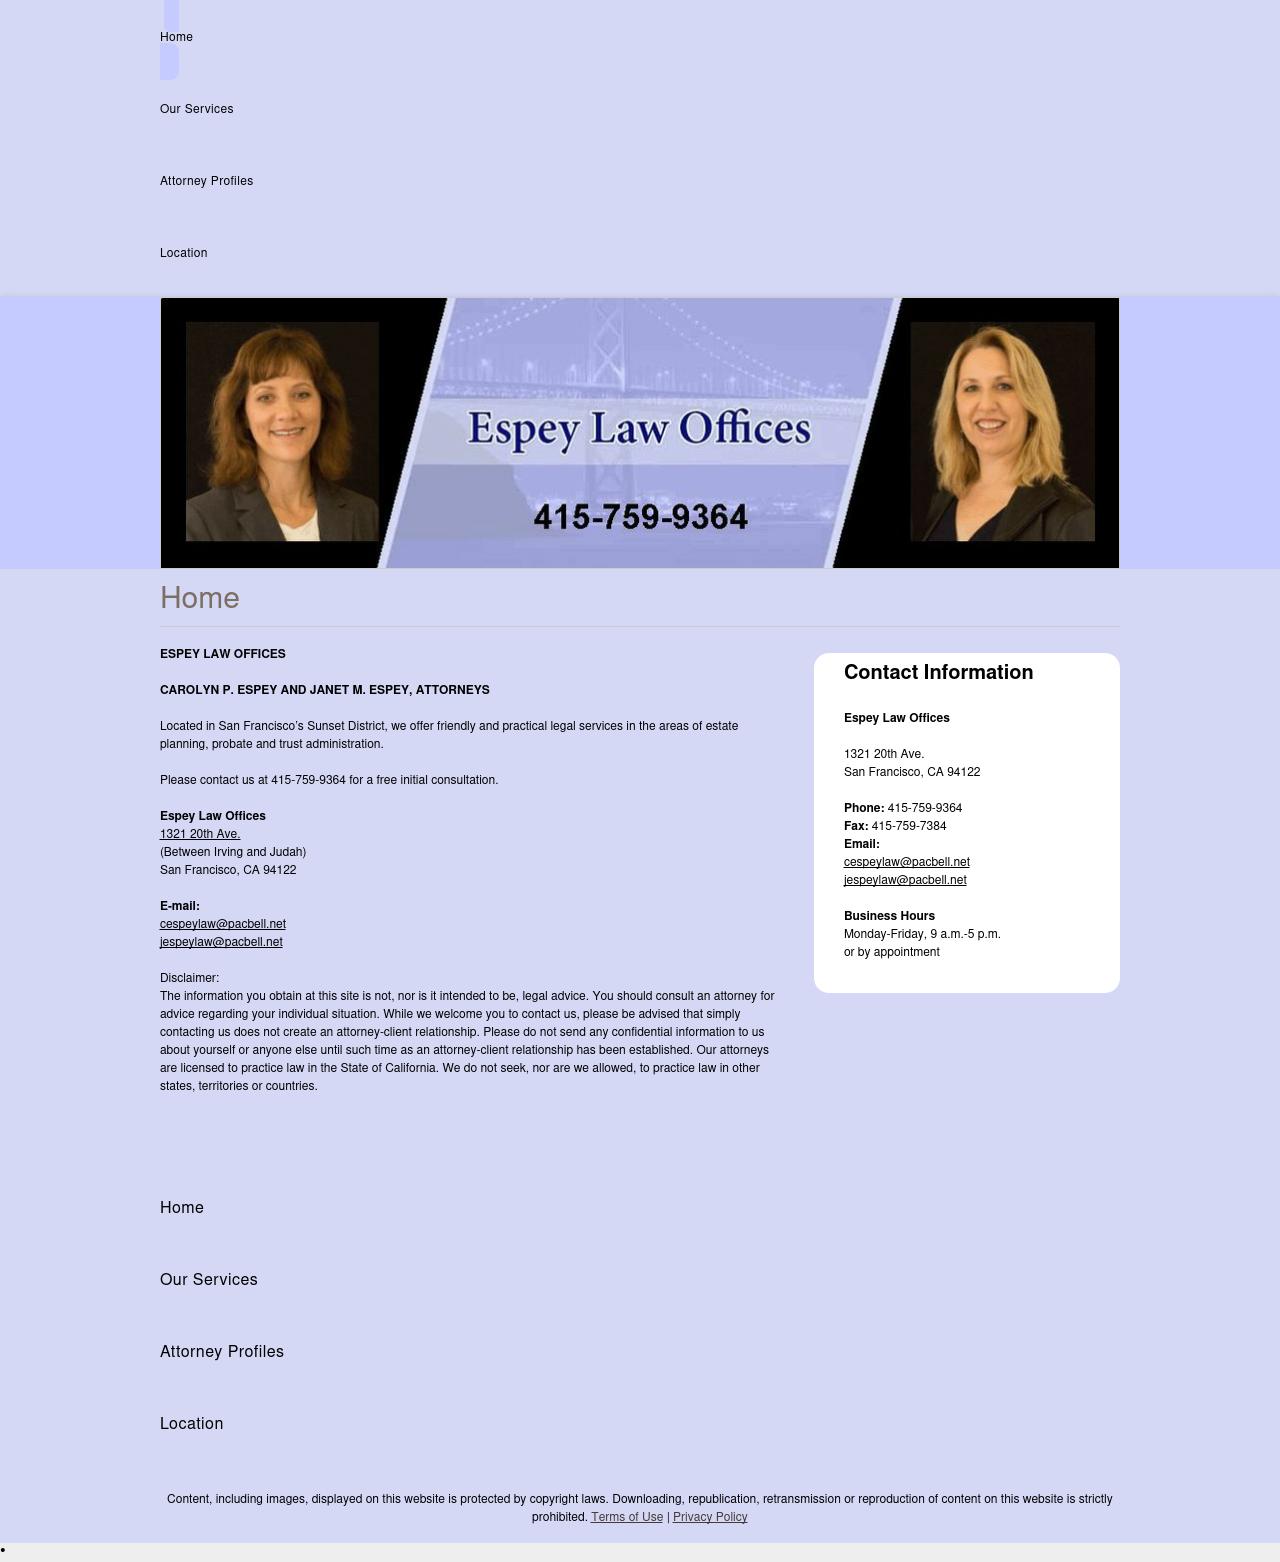 Espey Law Offices - San Francisco CA Lawyers